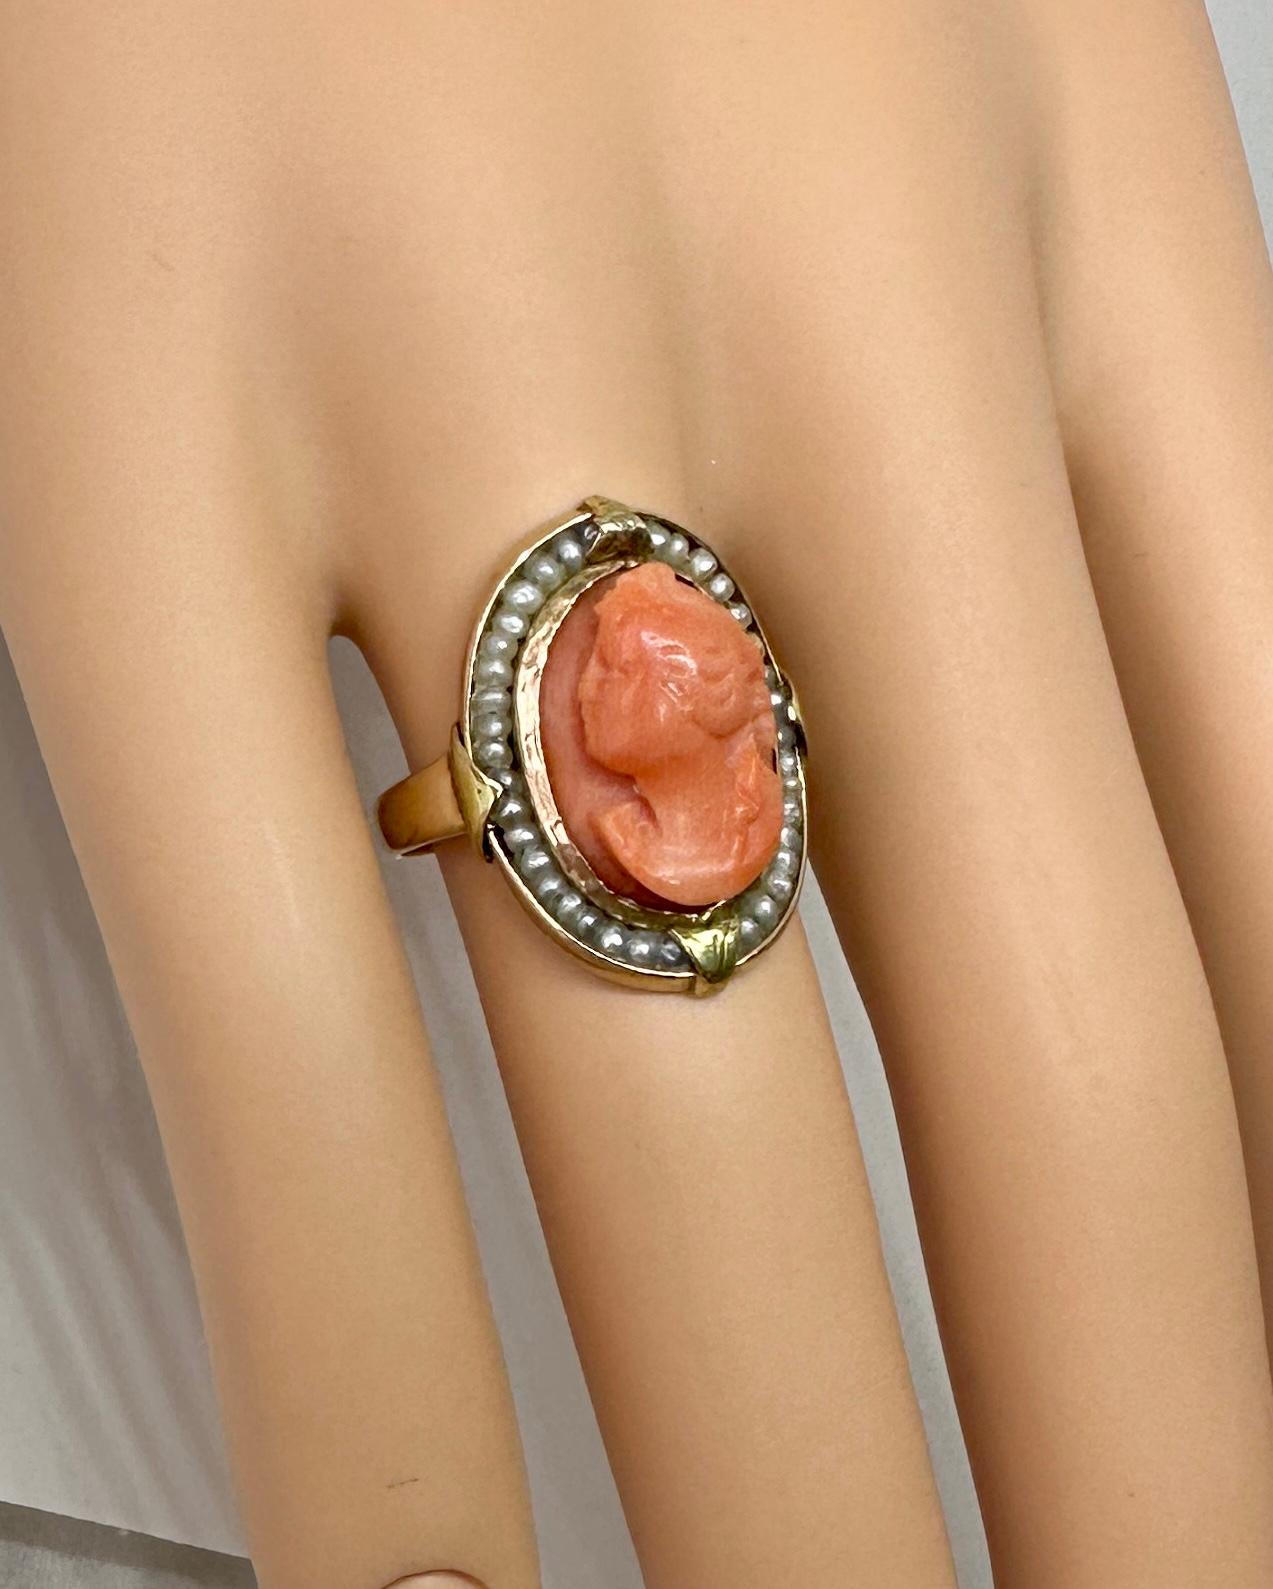 This is an absolutely stunning and rare antique Victorian - Belle Epoque Coral Cameo Ring with a hand carved image of a classical goddess woman set in a gorgeous 14 Karat Yellow Gold frame with a halo of Seed Pearls.   Coral cameos are very rare and